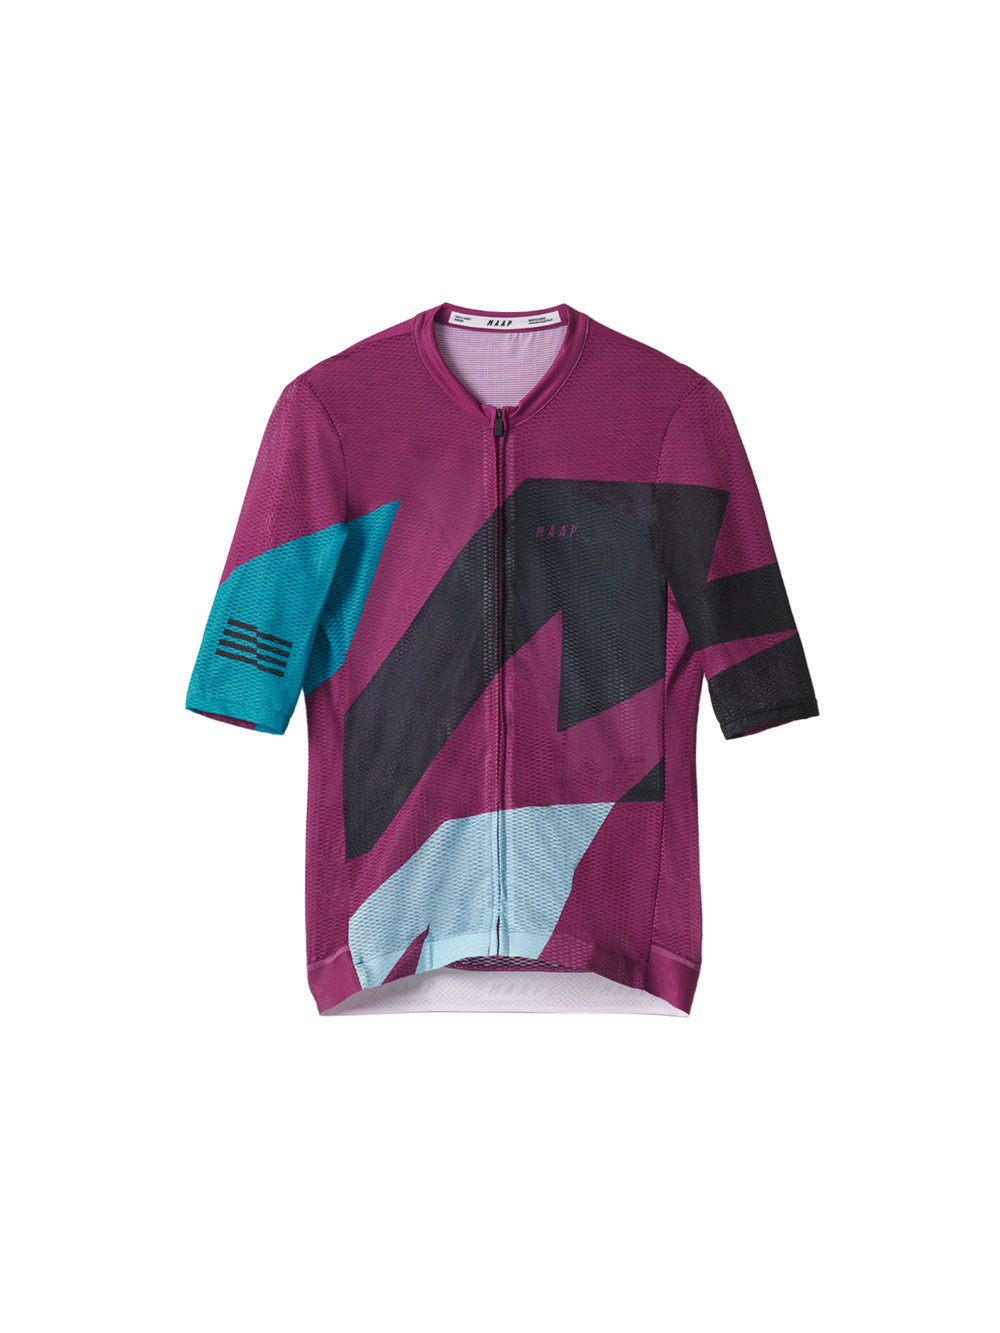 Product Image for Emerge Ultralight Pro Jersey